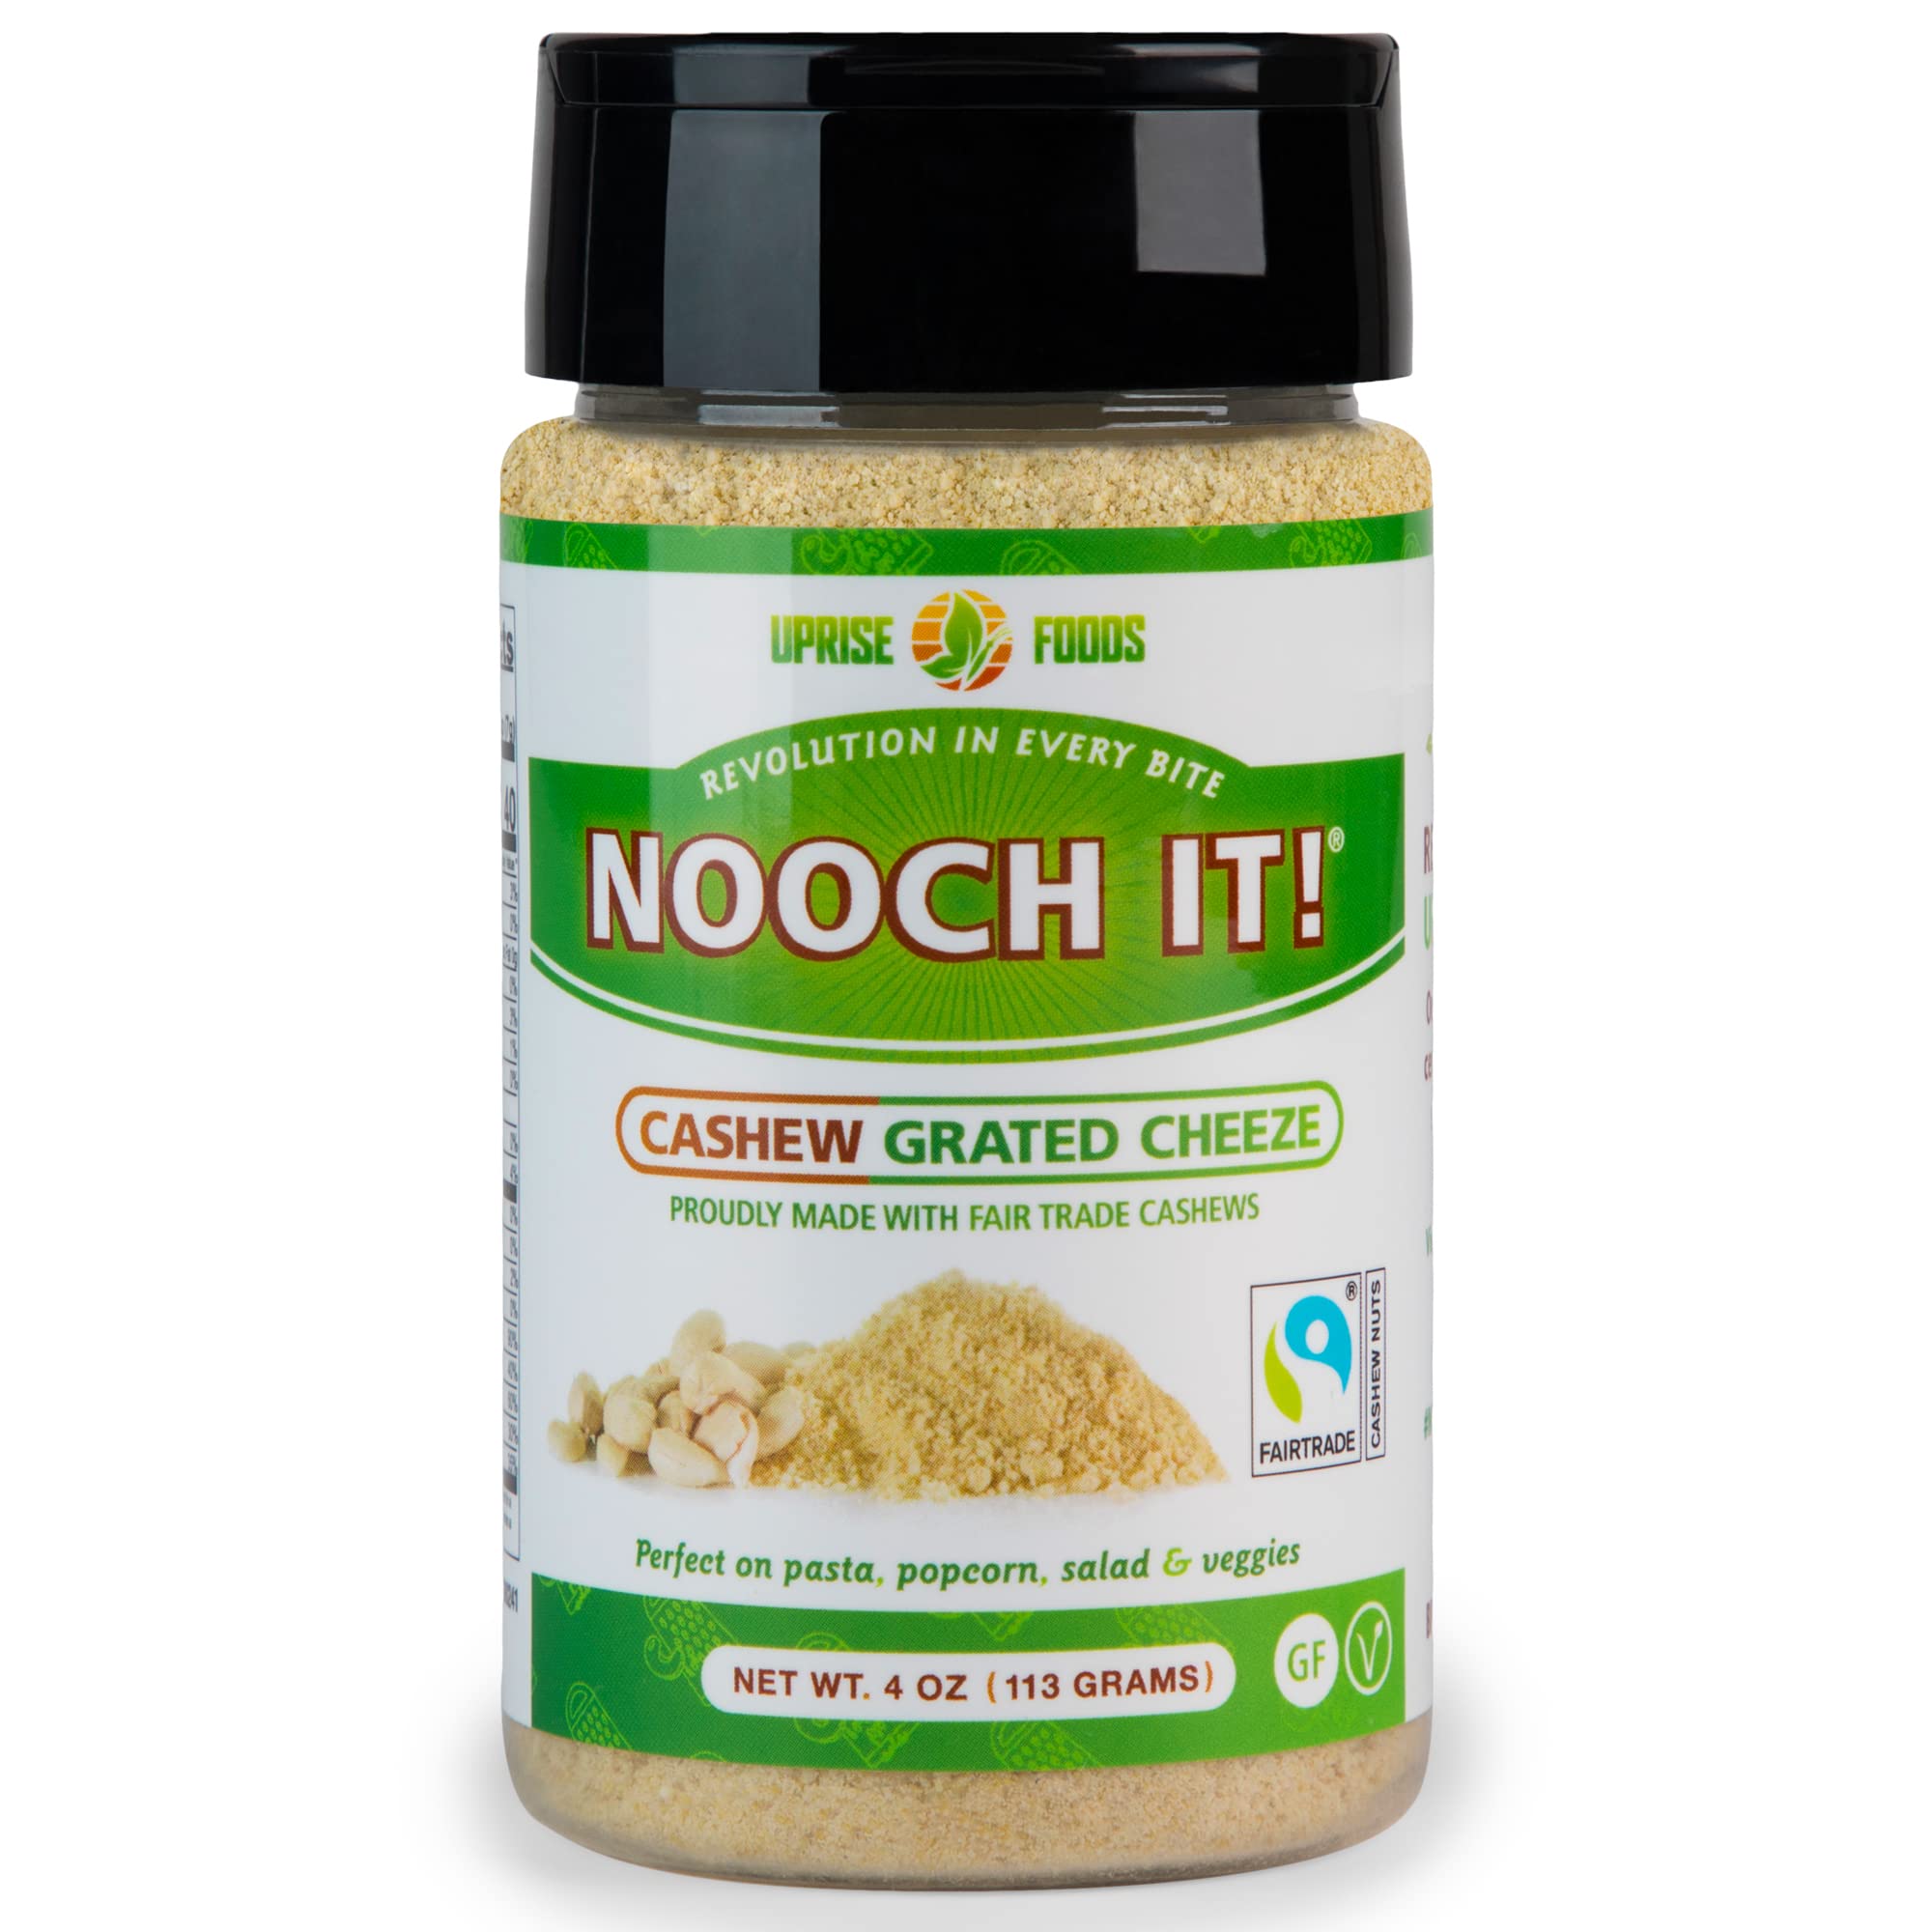 NOOCH IT! Dairy-Free Cashew Grated Cheeze